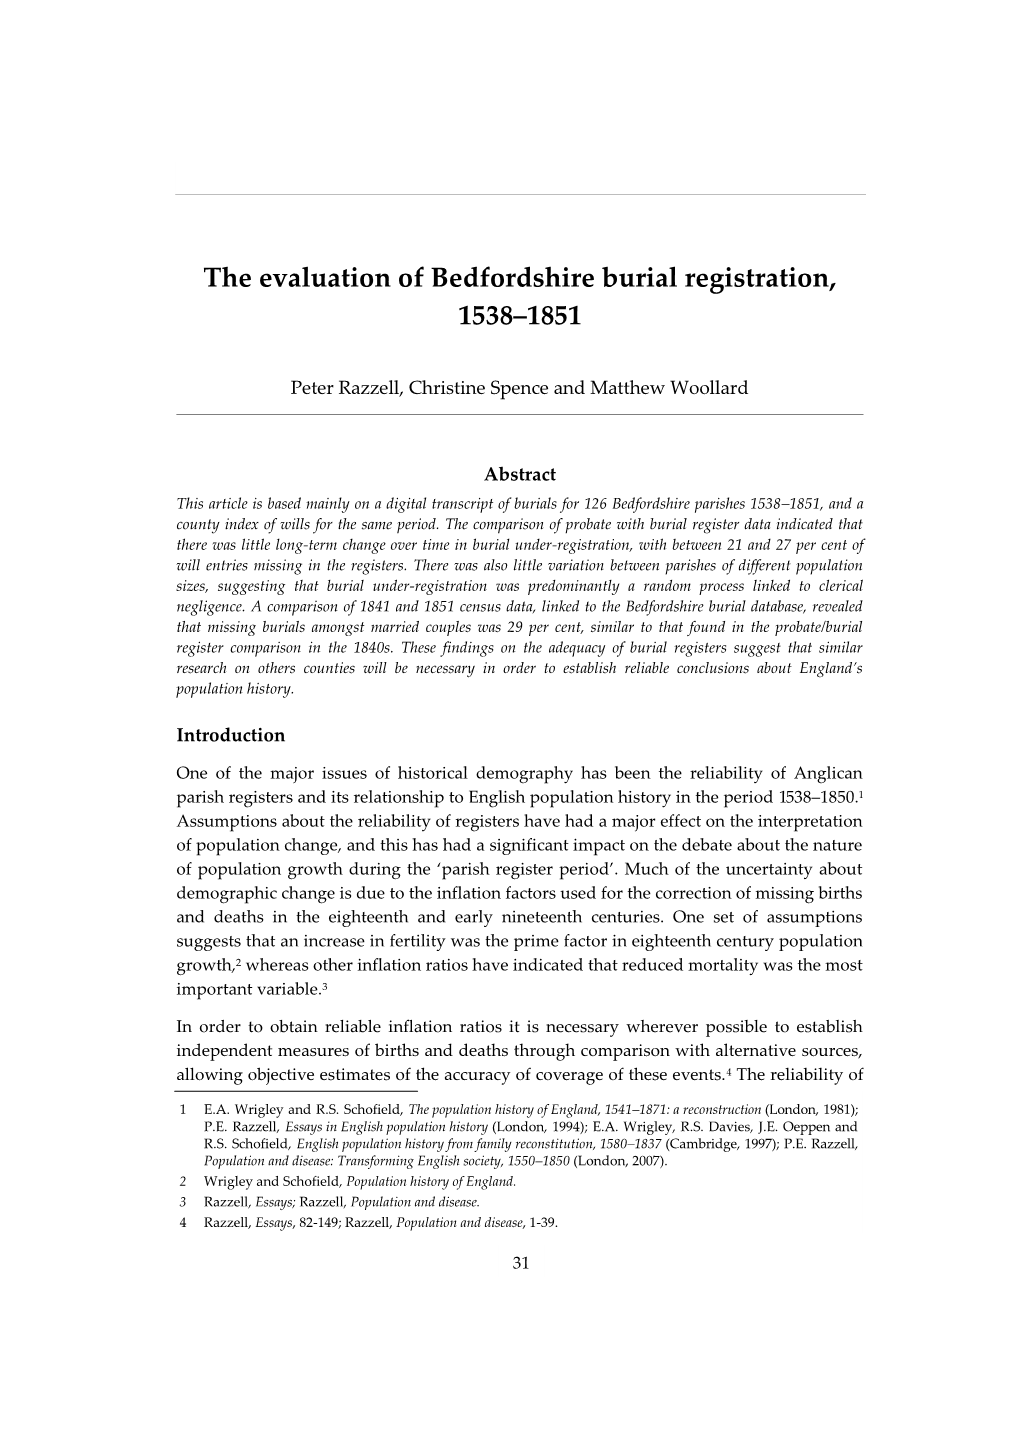 The Evaluation of Bedfordshire Burial Registration, 1538‒1851